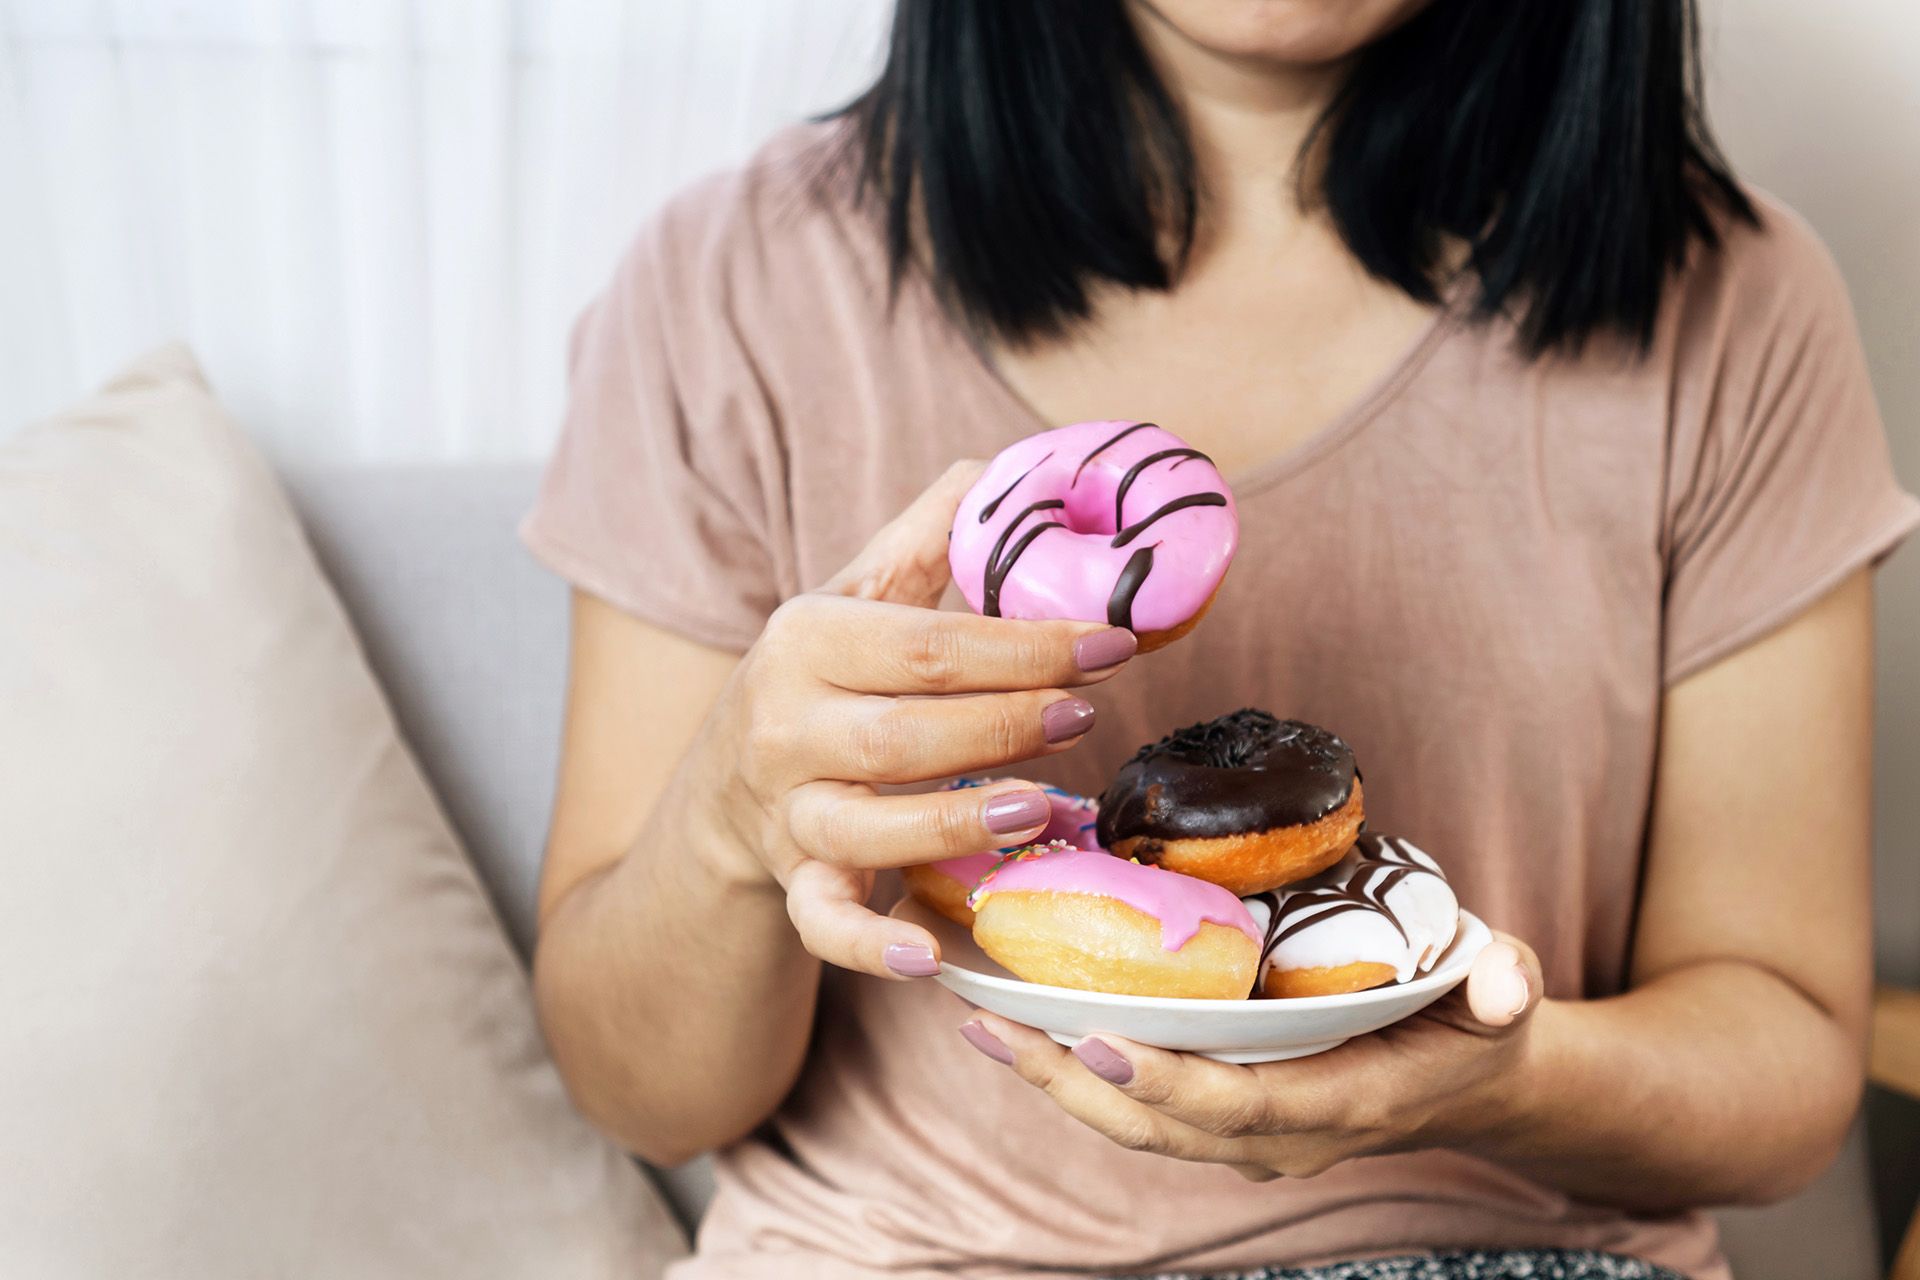 A woman is sitting on a couch holding a plate of donuts.